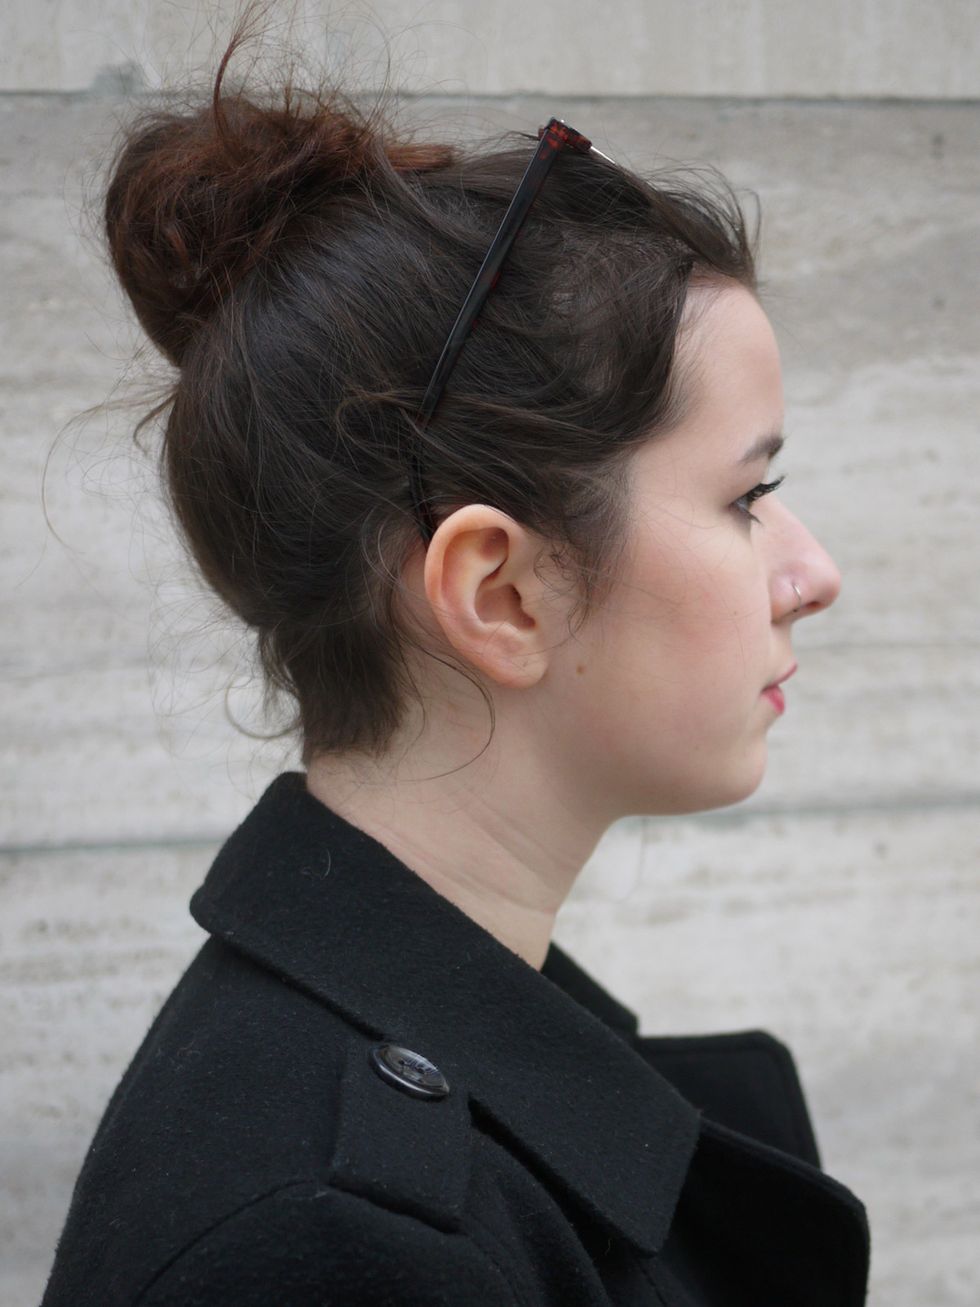 Ear, Lip, Hairstyle, Chin, Forehead, Collar, Style, Neck, Street fashion, Youth, 